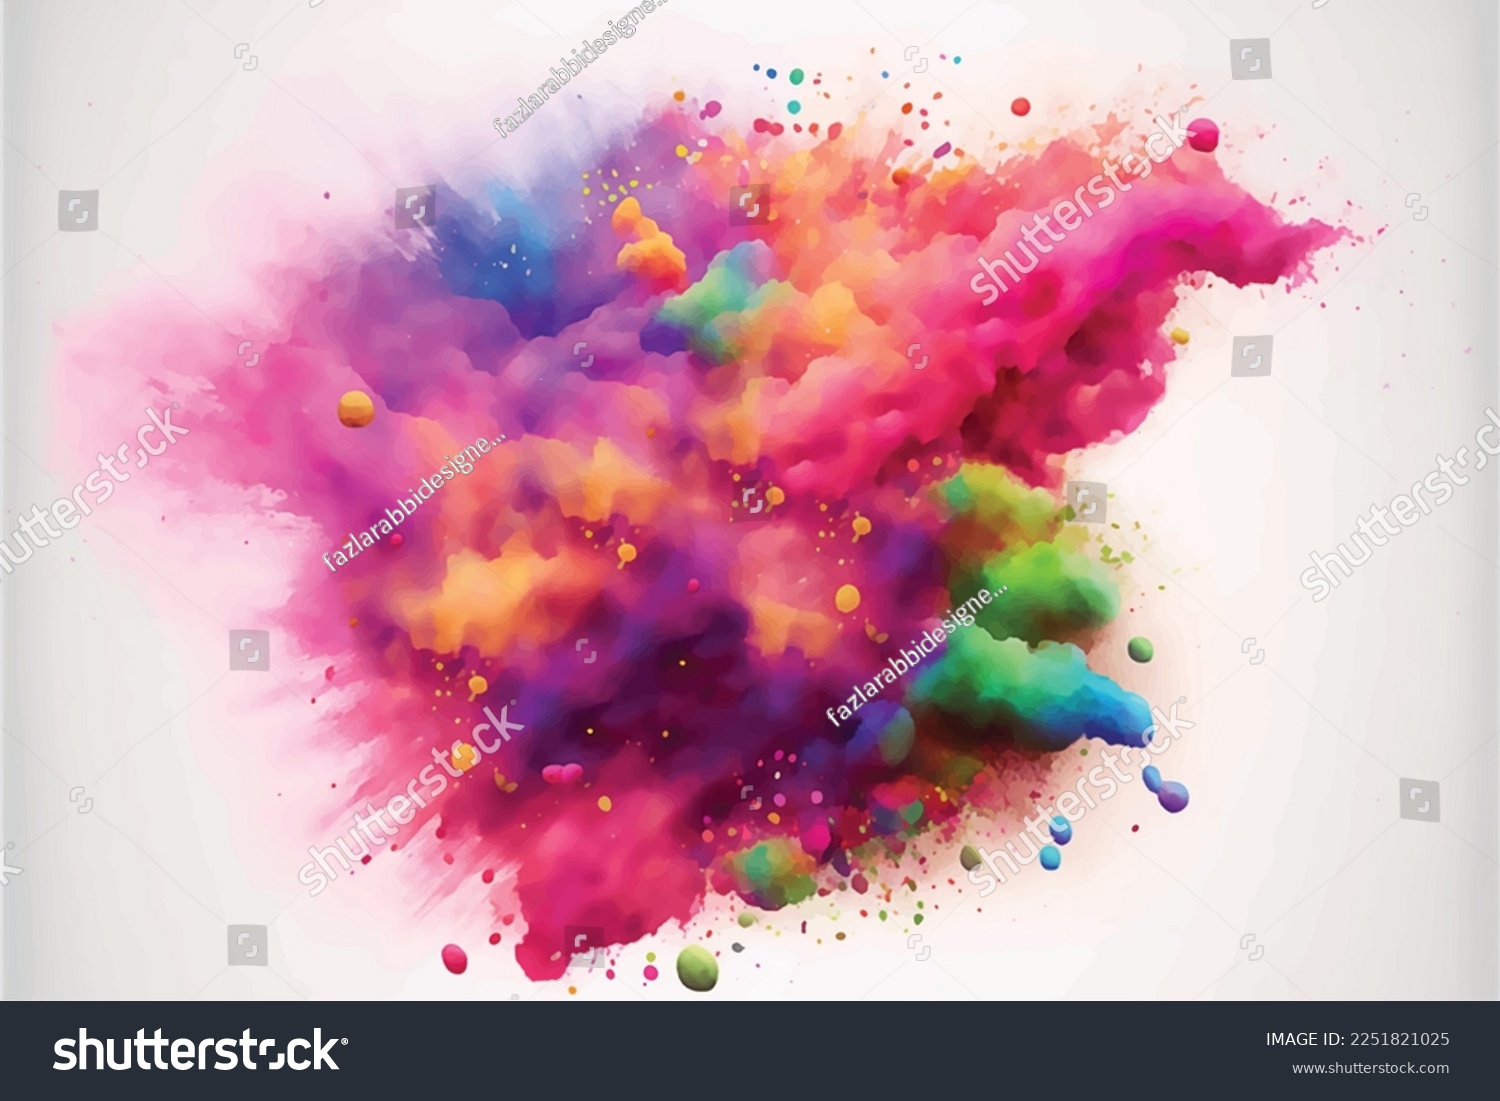 Celebrate the vibrant festival of Holi with joy and happiness! Happy Holi is a traditional Hindu festival that marks the arrival of spring and is celebrated with a splash of colors, music, dance. #2251821025